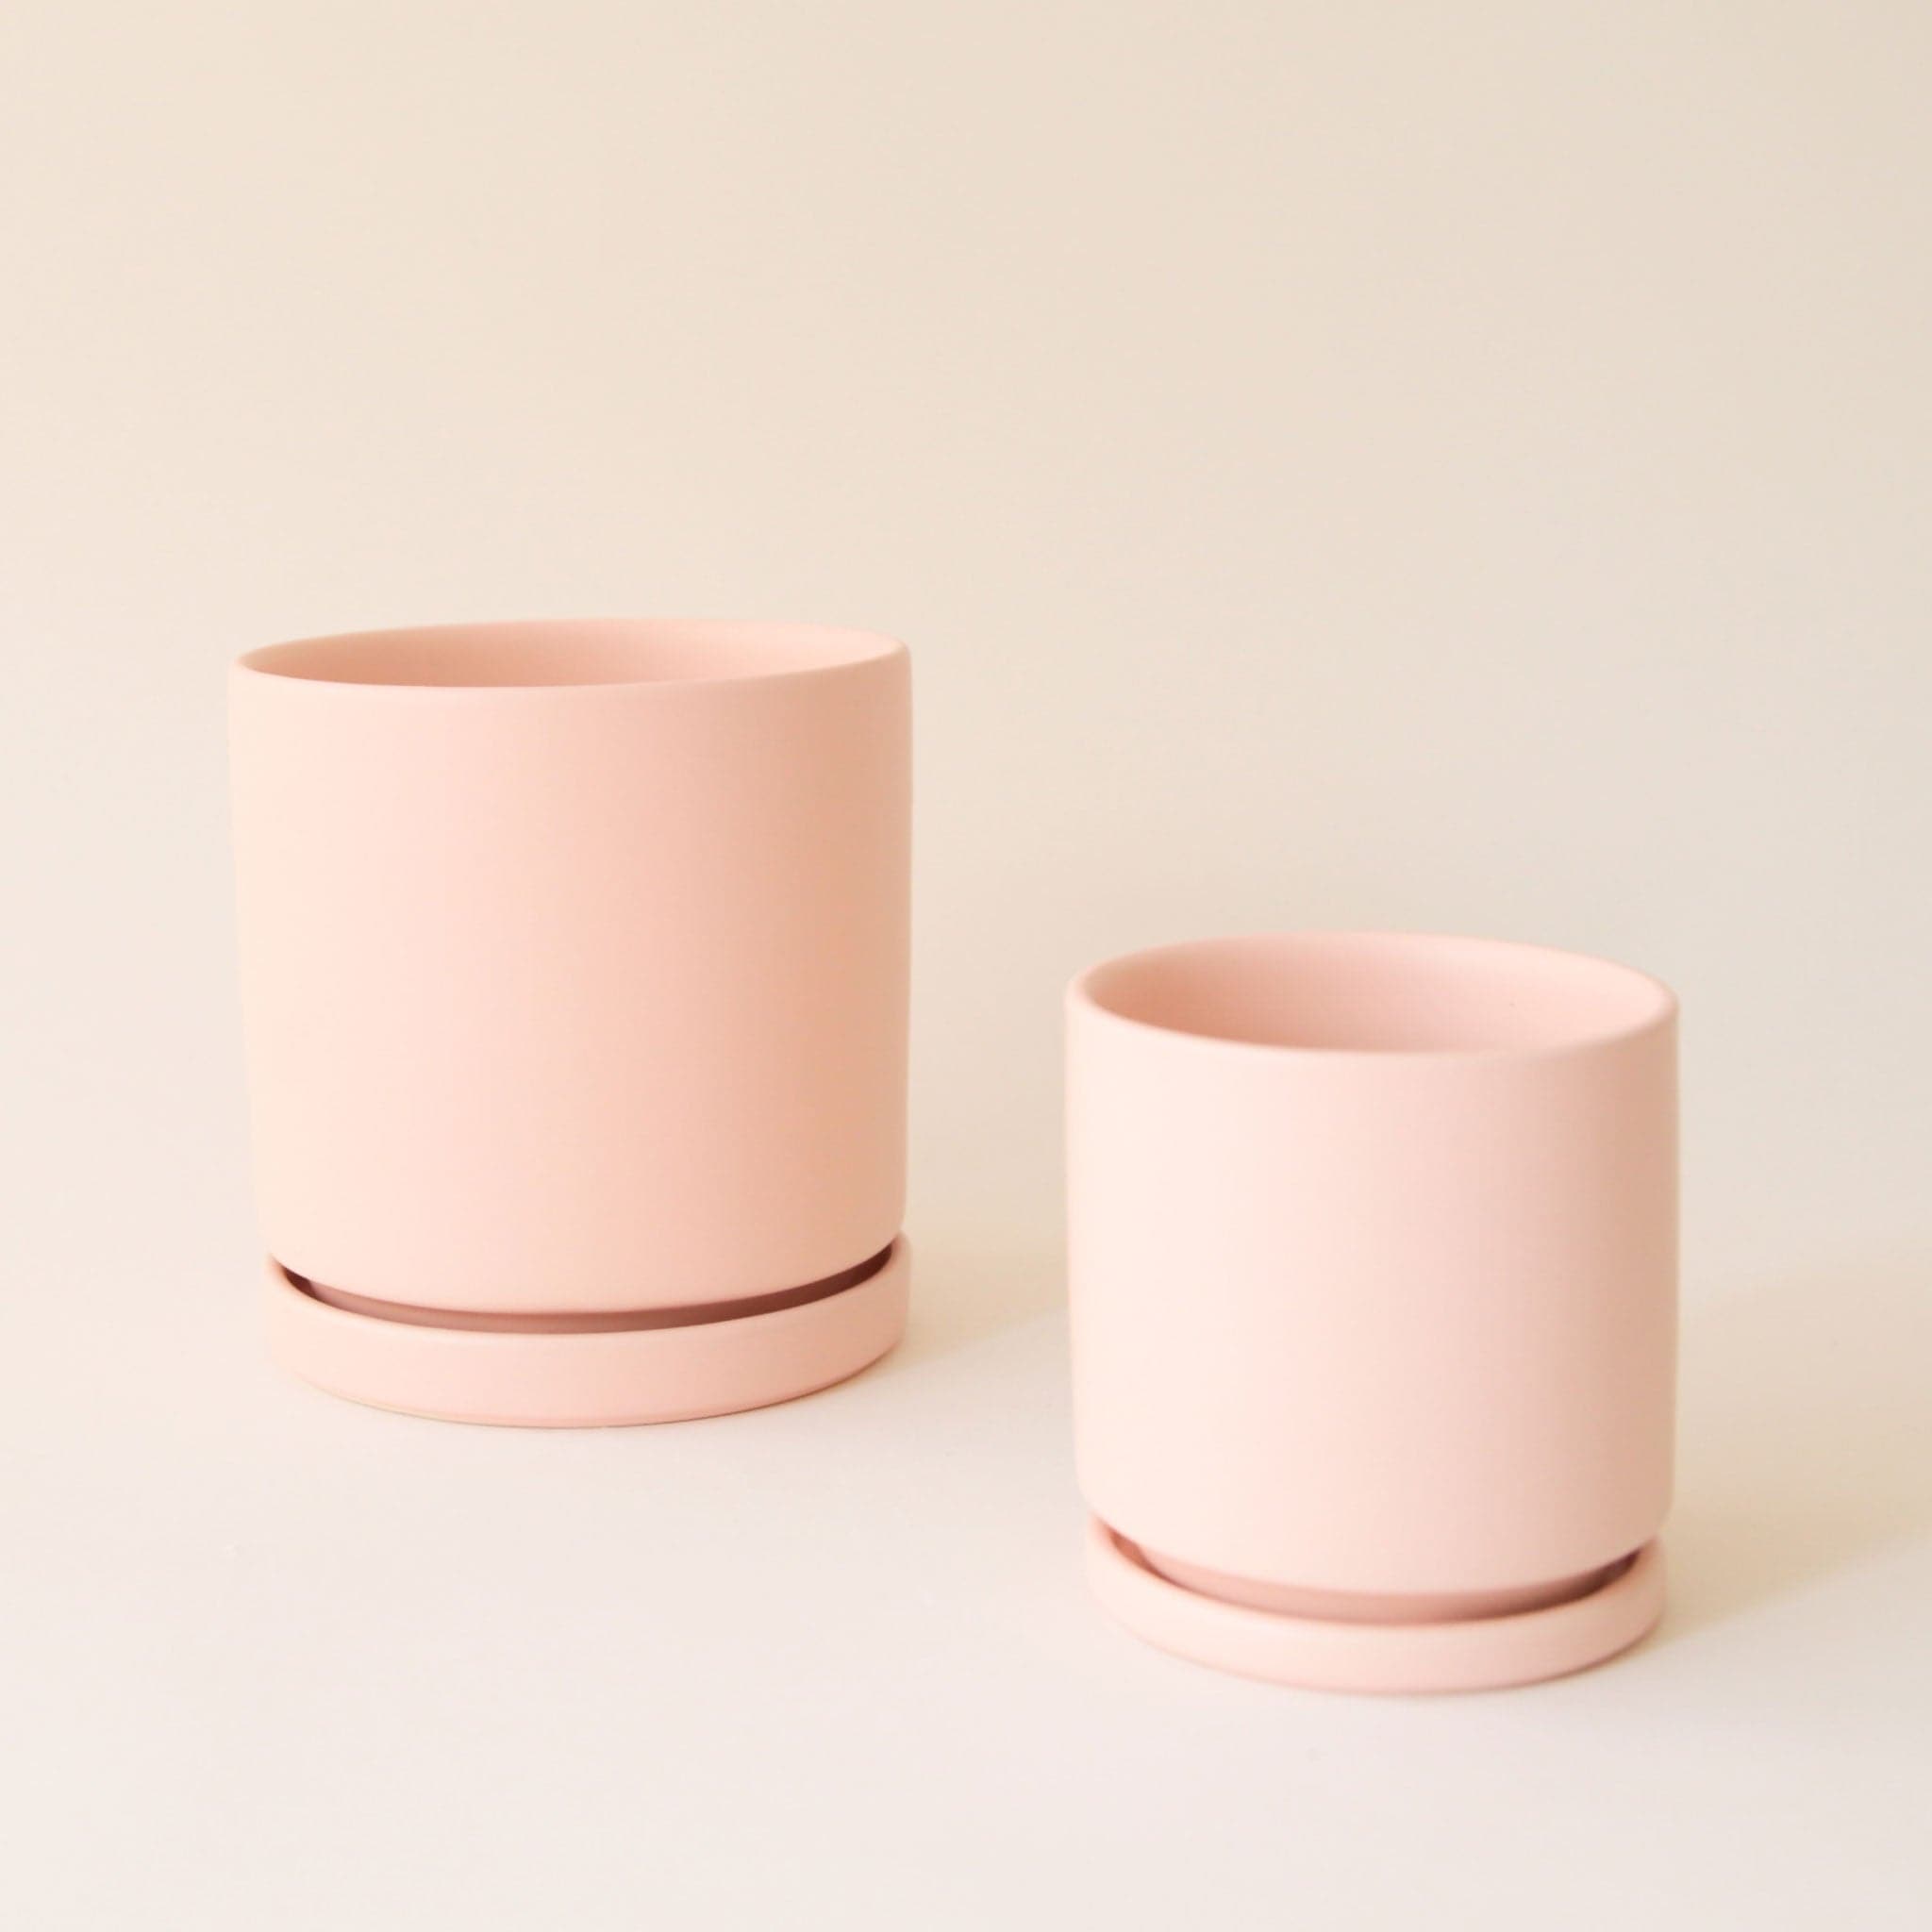 On a cream background is two different sized ceramic pots in a light pink shaded with removable trays for watering.